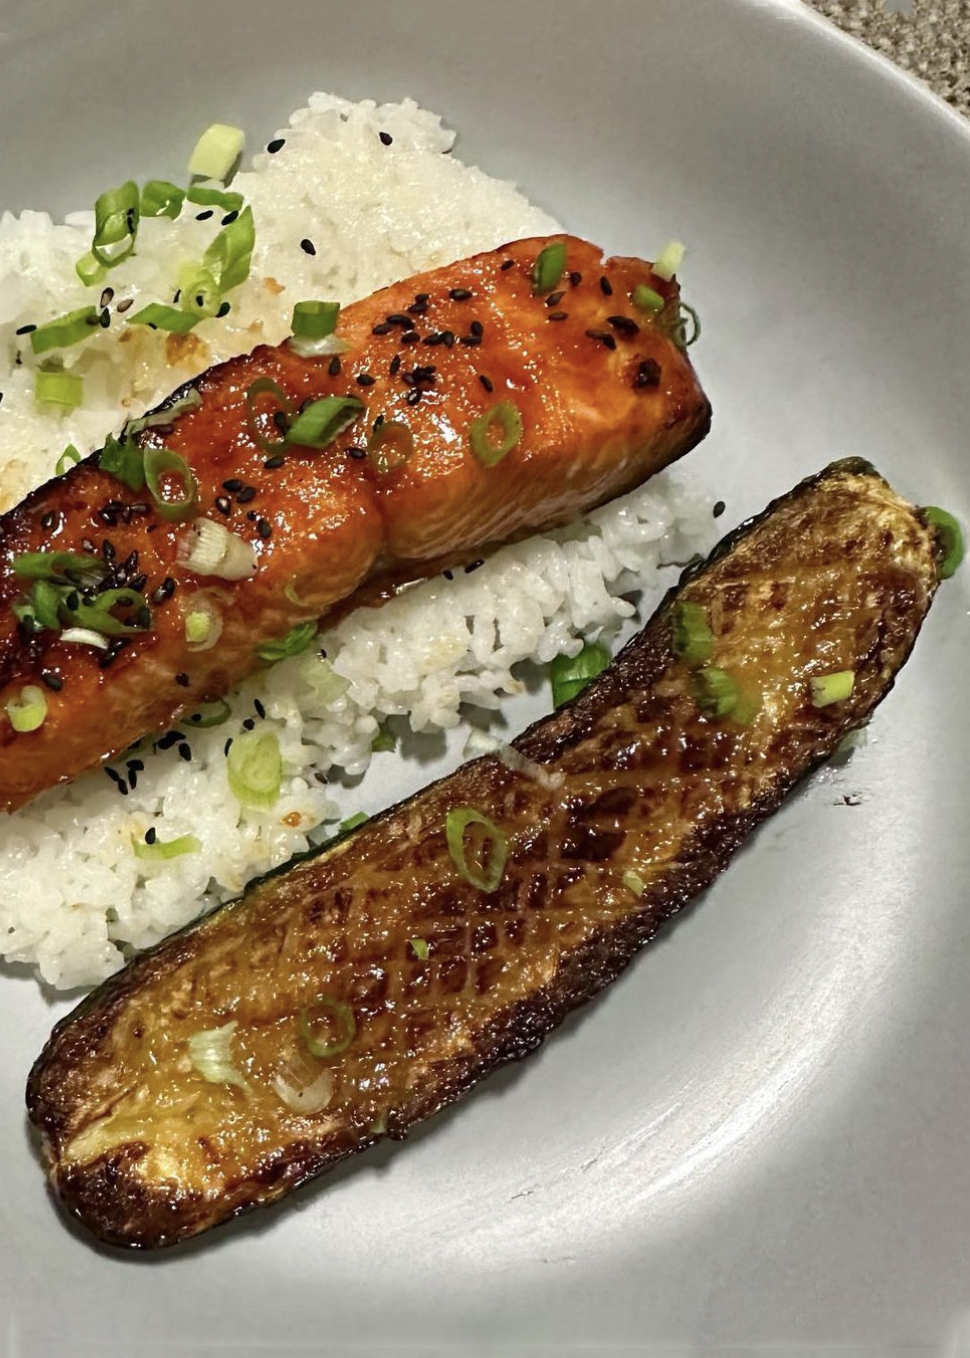 thomas keller oven roasted zucchini with gochujang salmon, reader review